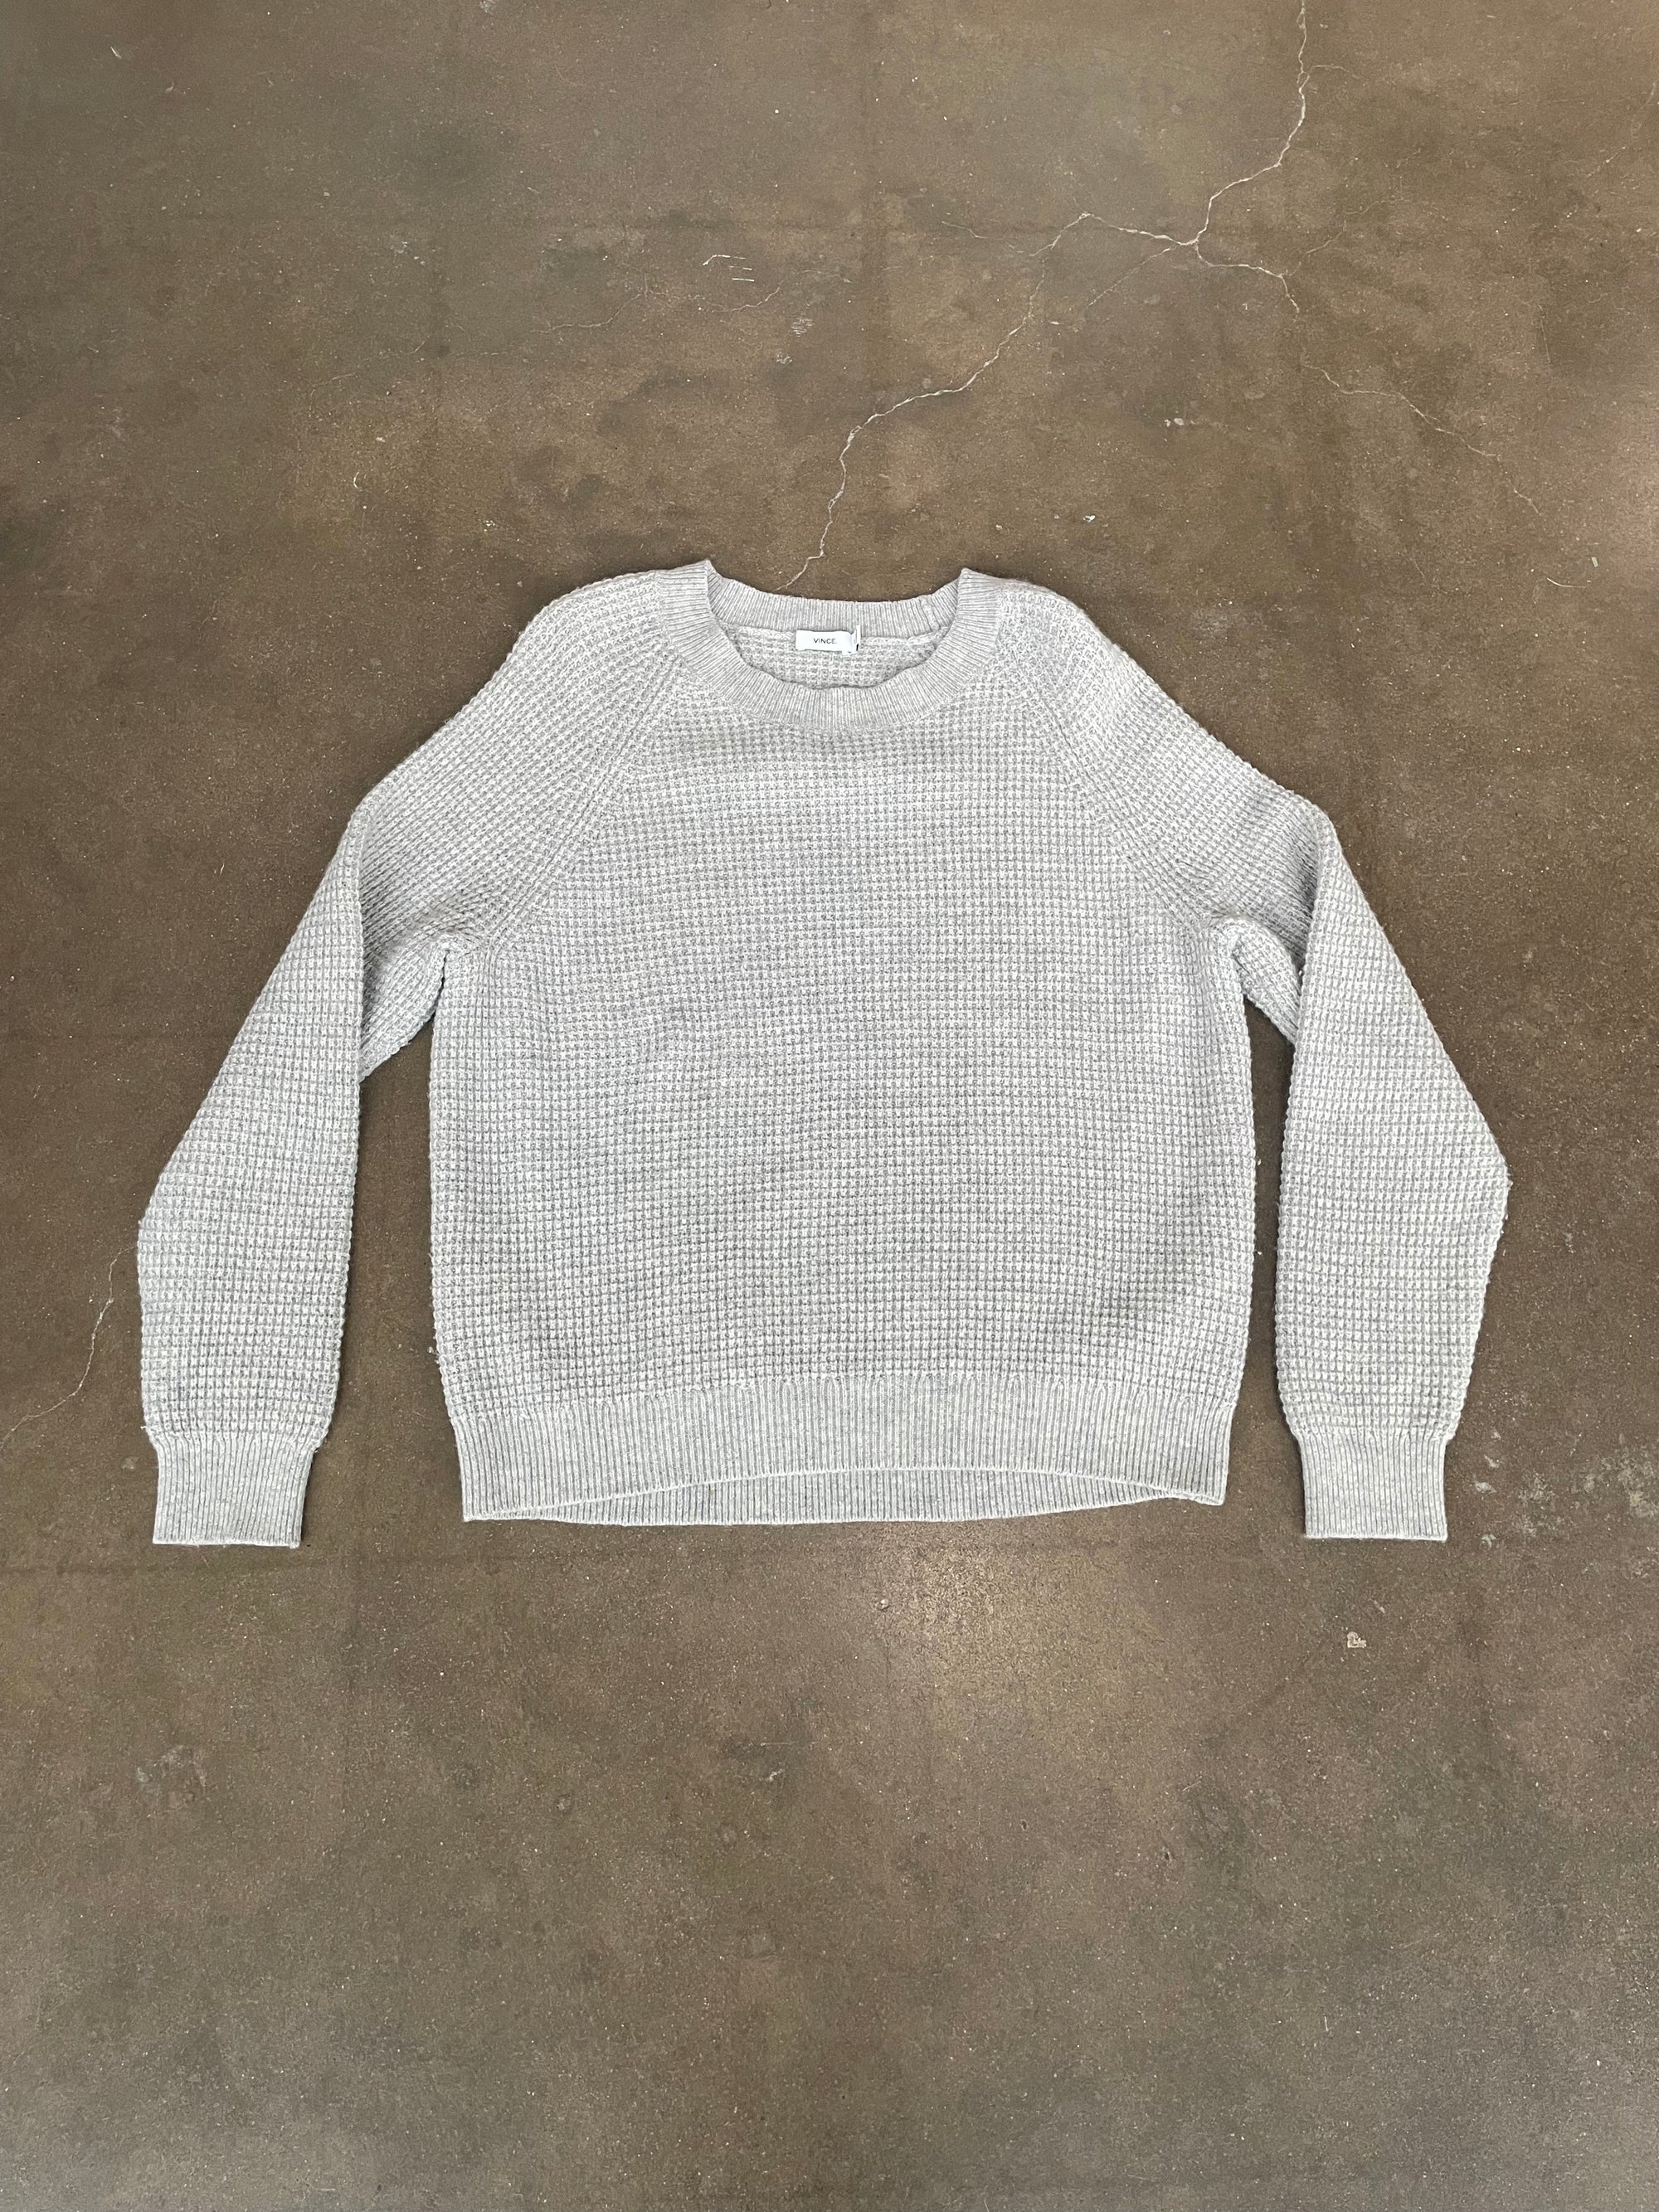 Vince Grey Woven Sweater